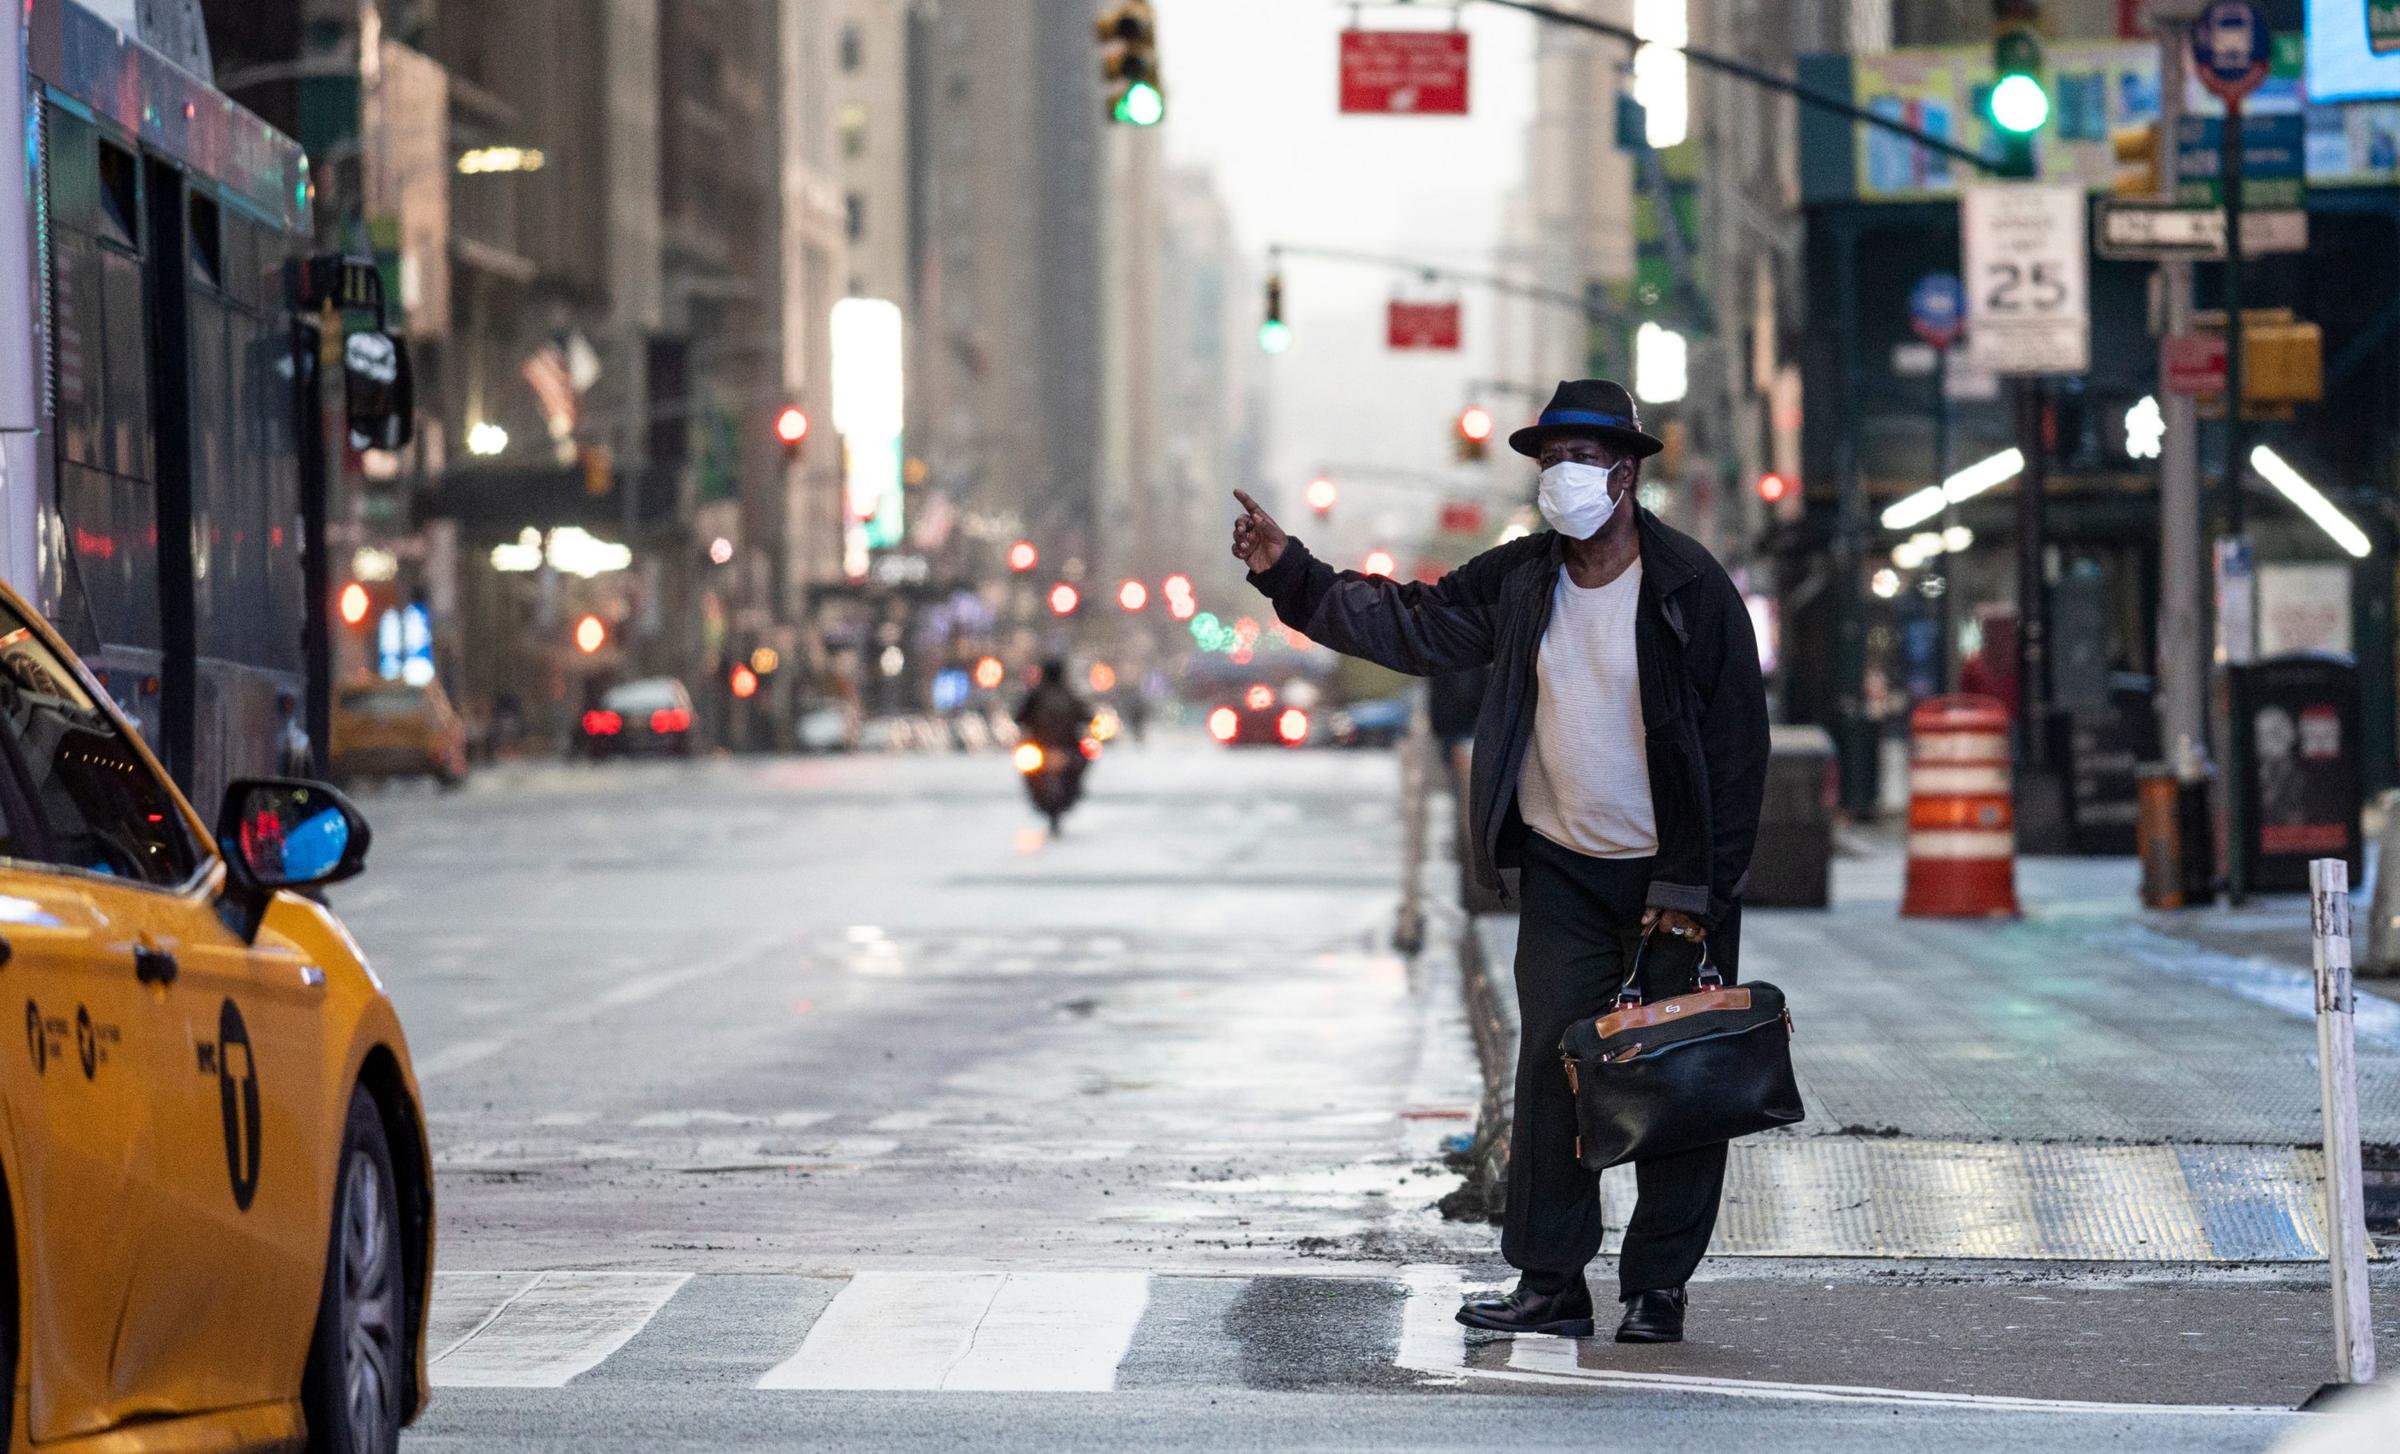 A man wearing a mask tries to catch a taxi at Times Square amid the COVID-19 pandemic on April 30, 2020 in New York City